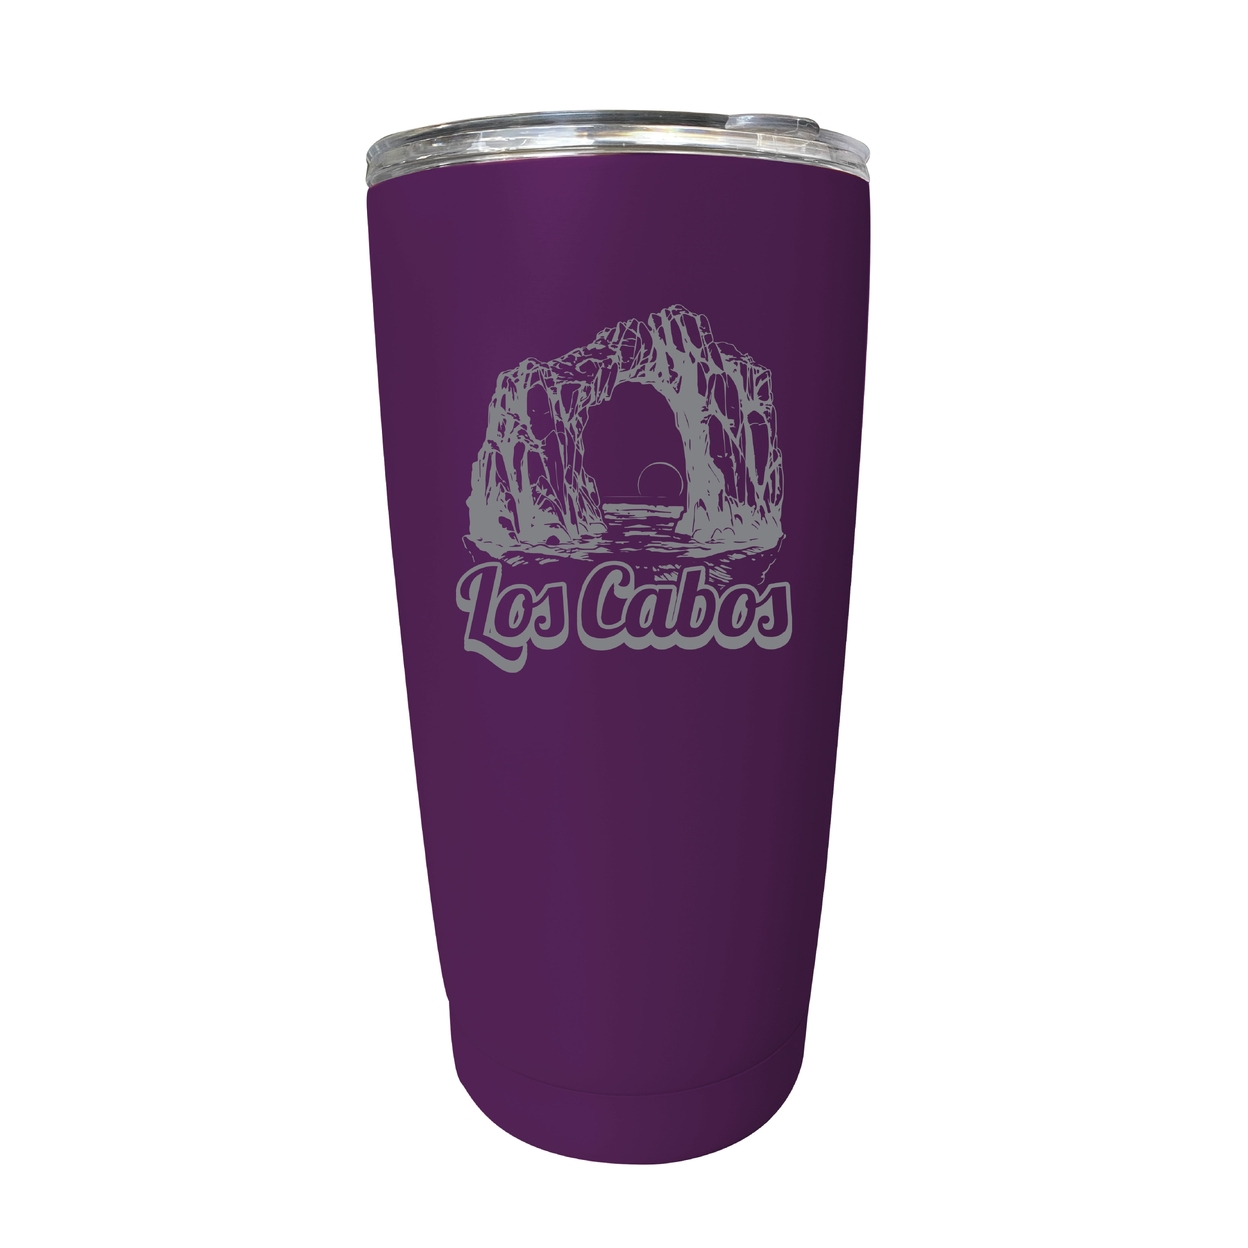 Los Cabos Mexico Souvenir 16 Oz Engraved Stainless Steel Insulated Tumbler - Purple,,4-Pack